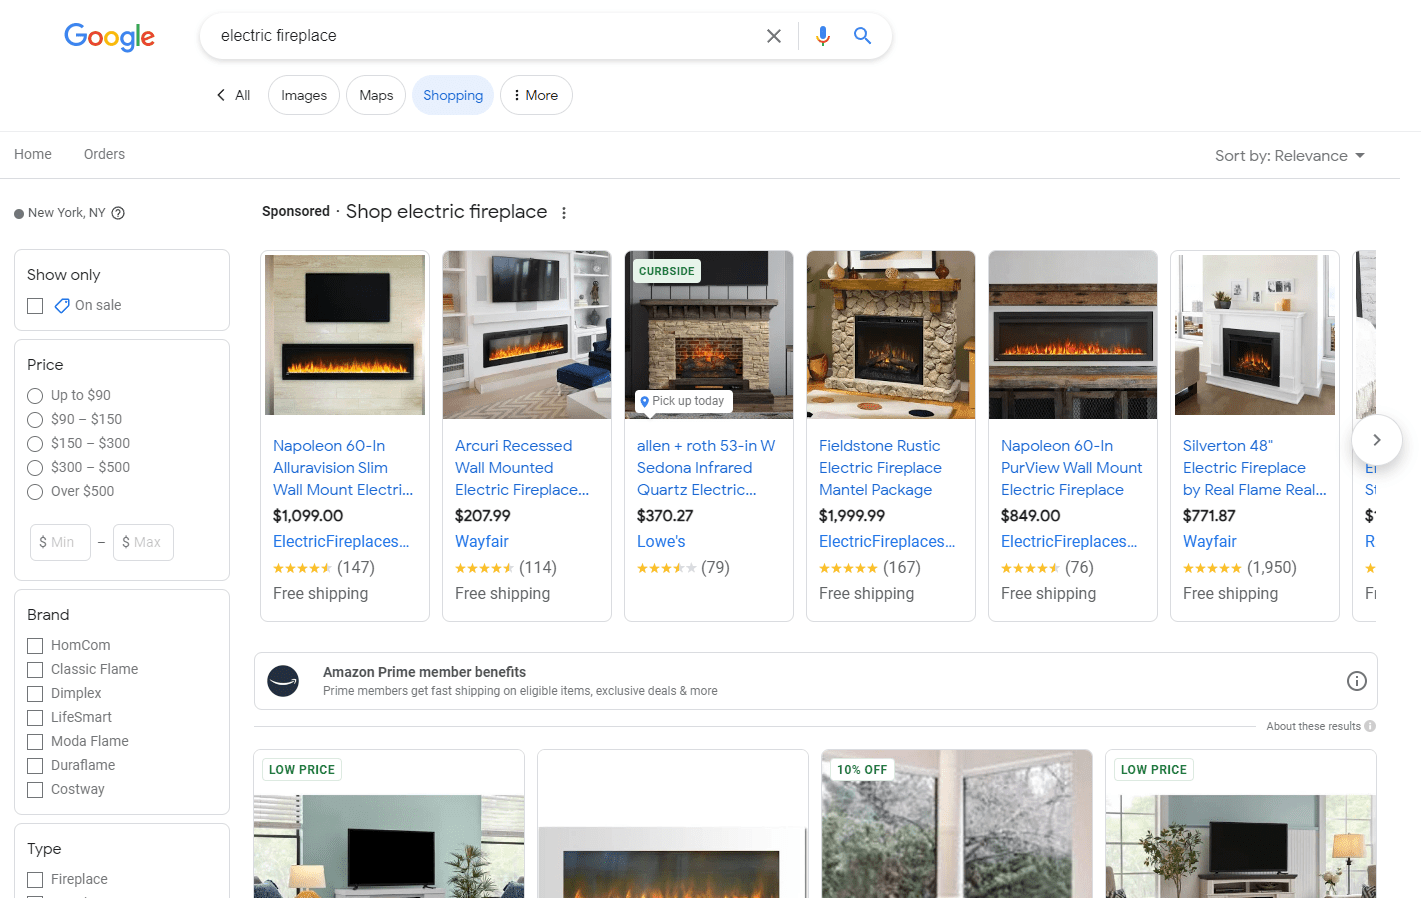 Electric Fireplaces Prices on Google -  